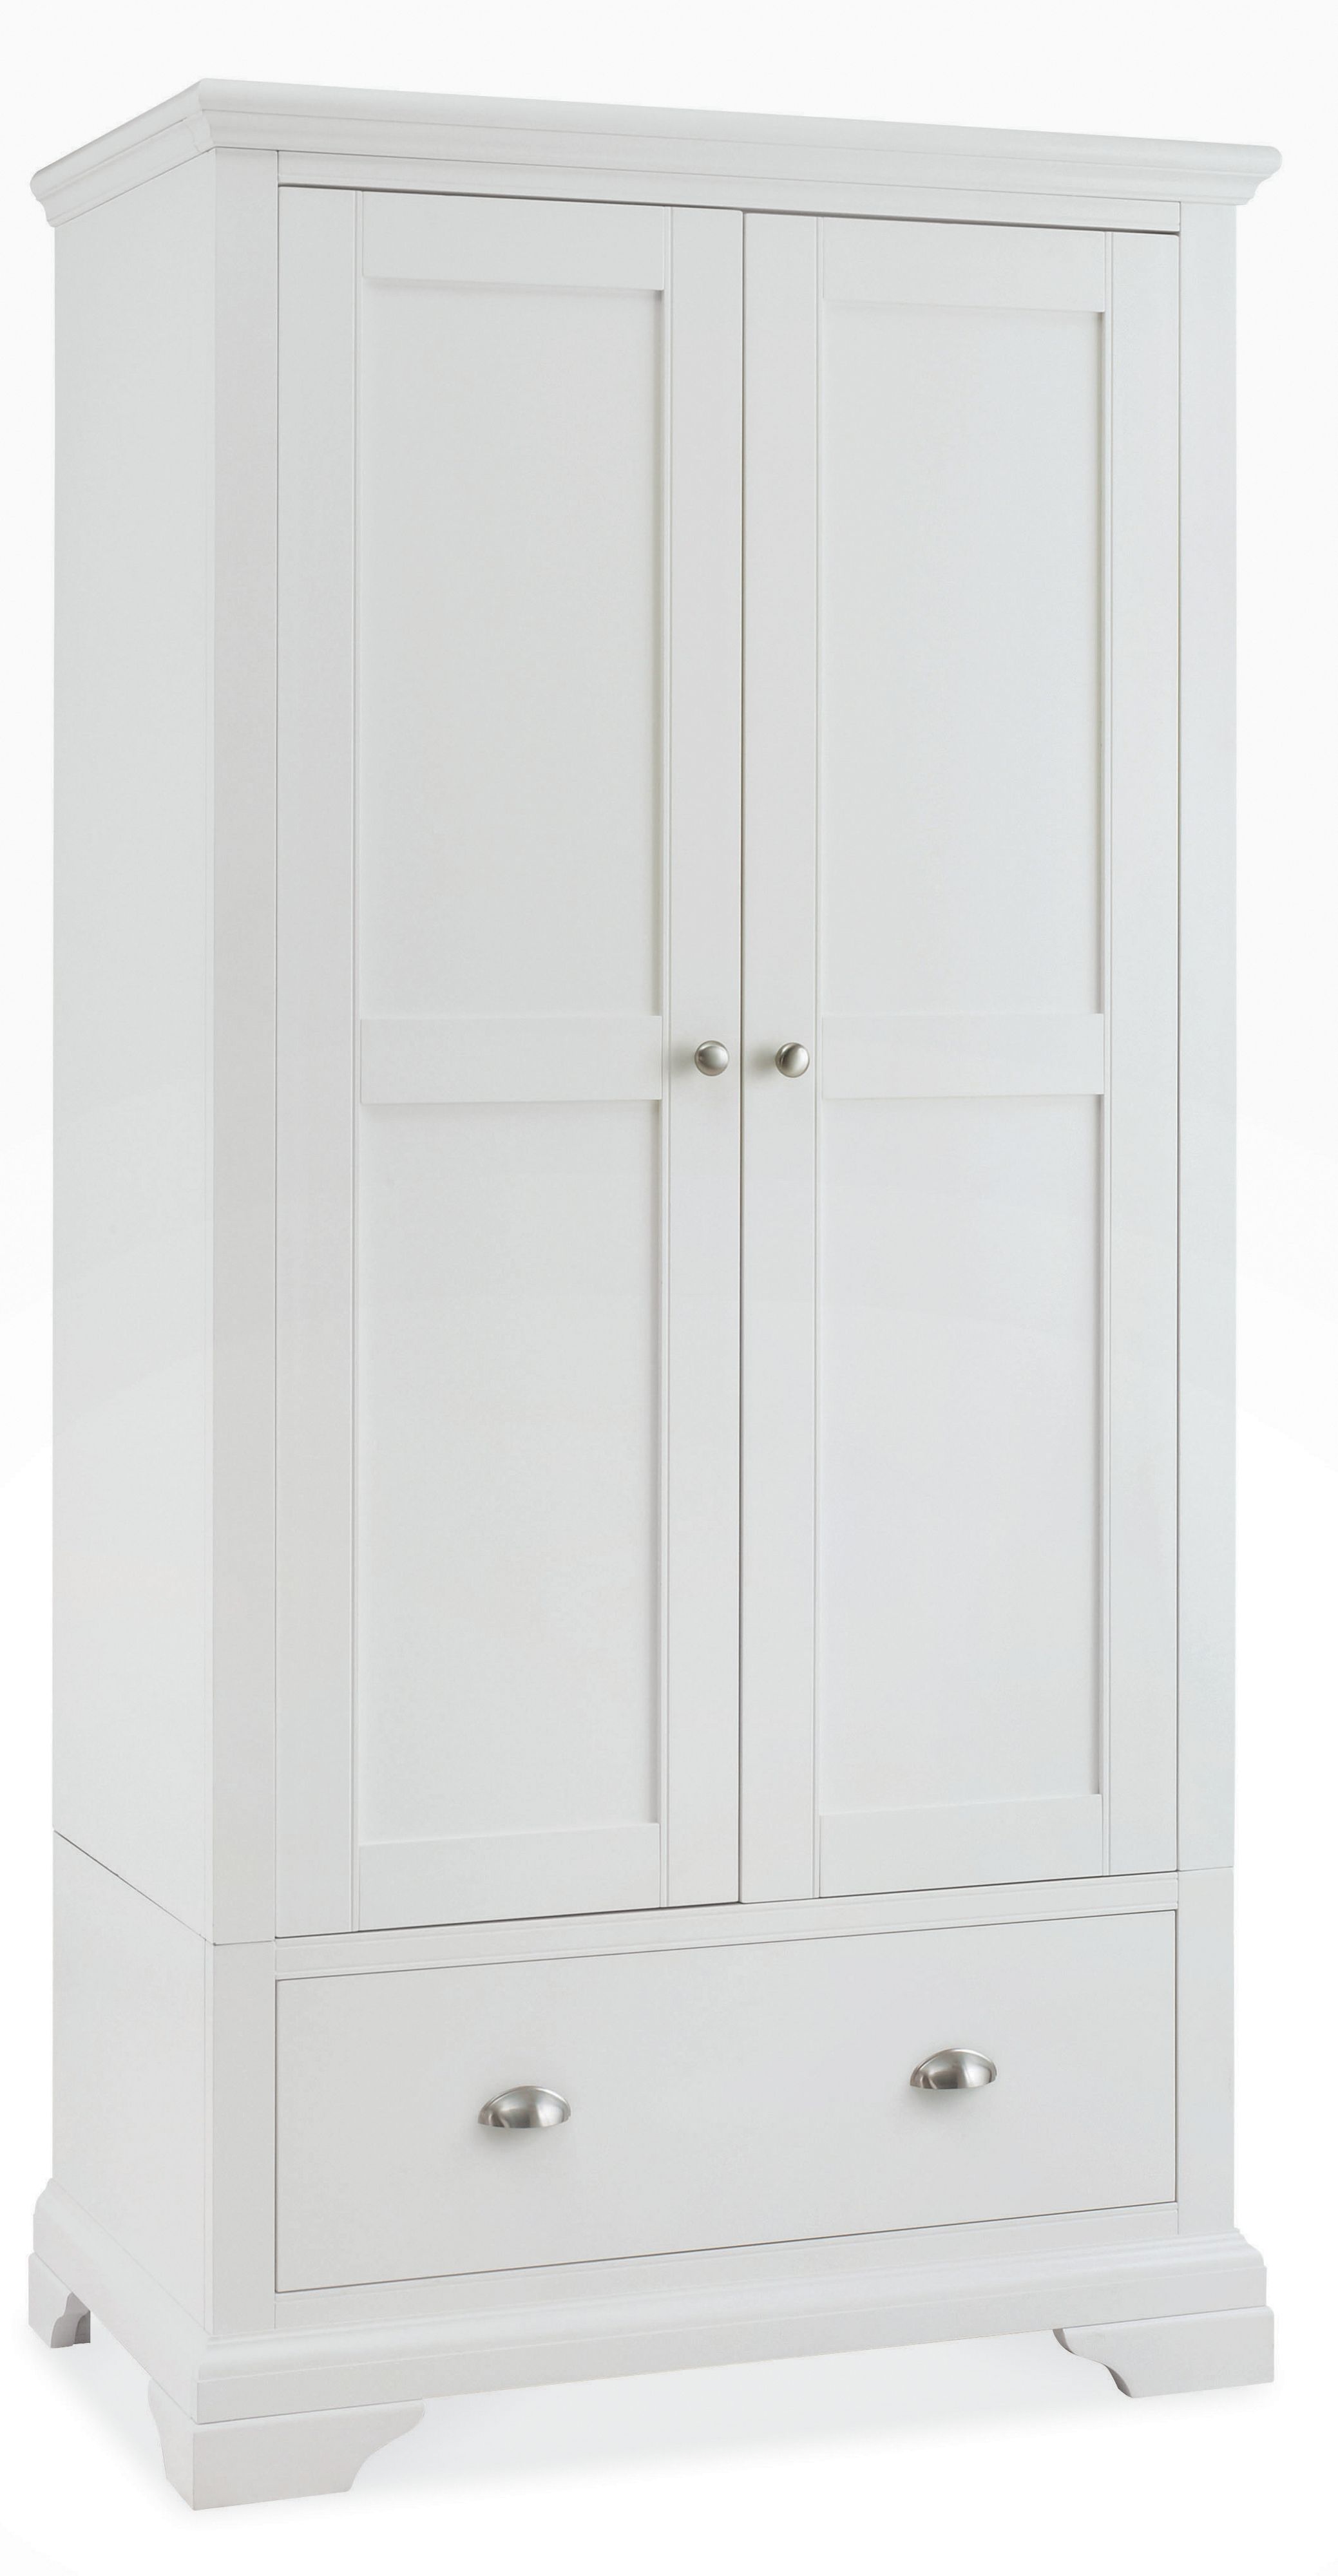 Beautiful Linea Etienne White Double Wardrobe With Drawer - House of Fraser white wardrobe with drawers